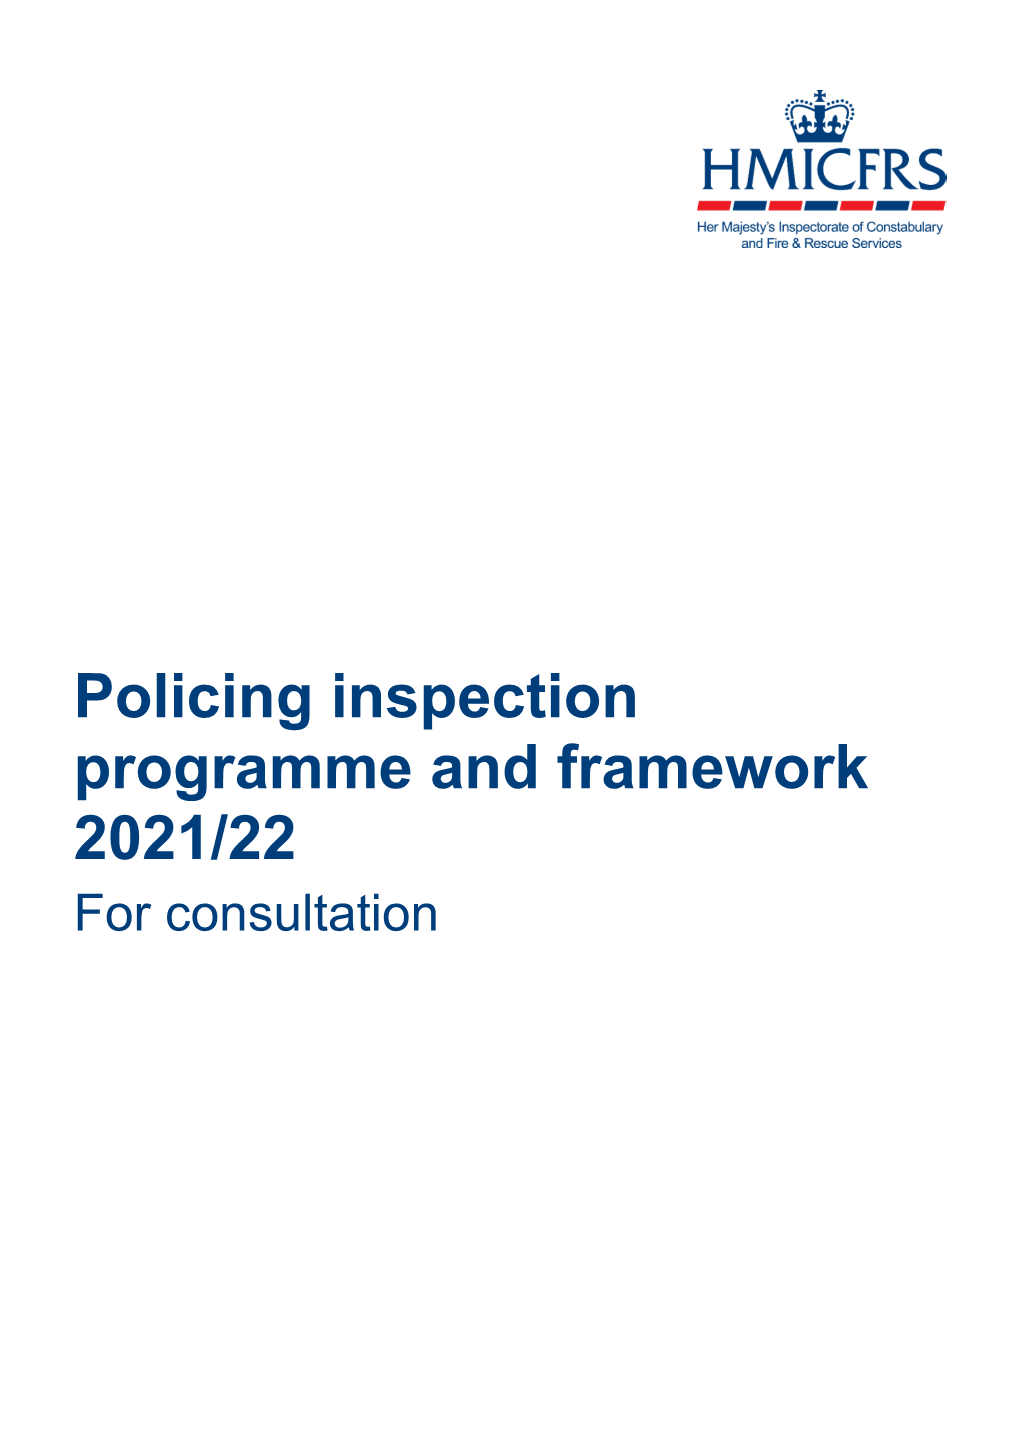 Policing Inspection Programme and Framework 2021/22: for Consultation